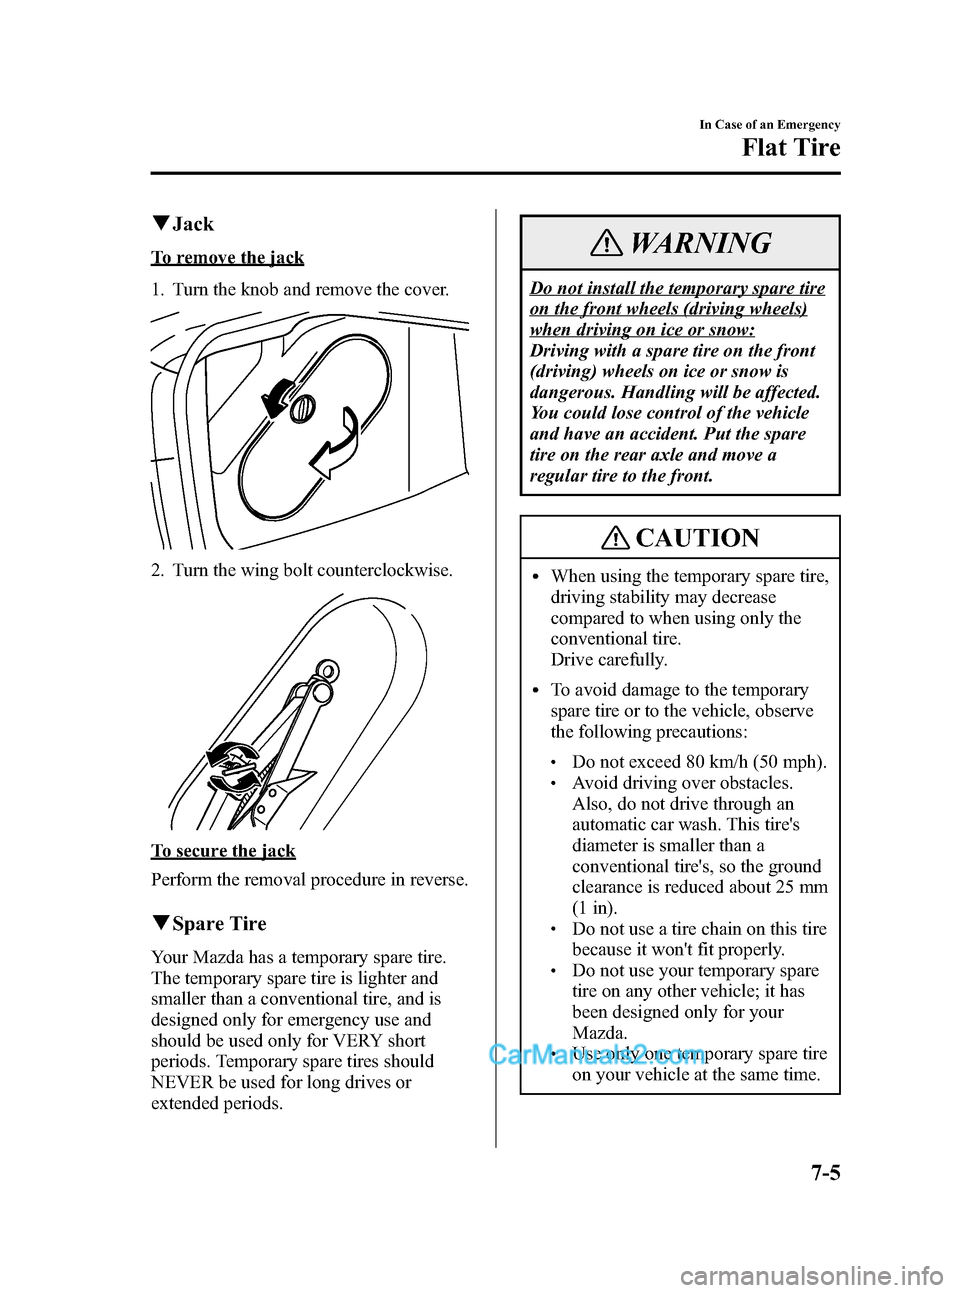 MAZDA MODEL MAZDASPEED 3 2007  Owners Manual (in English) Black plate (257,1)
qJack
To remove the jack
1. Turn the knob and remove the cover.
2. Turn the wing bolt counterclockwise.
To secure the jack
Perform the removal procedure in reverse.
qSpare Tire
You